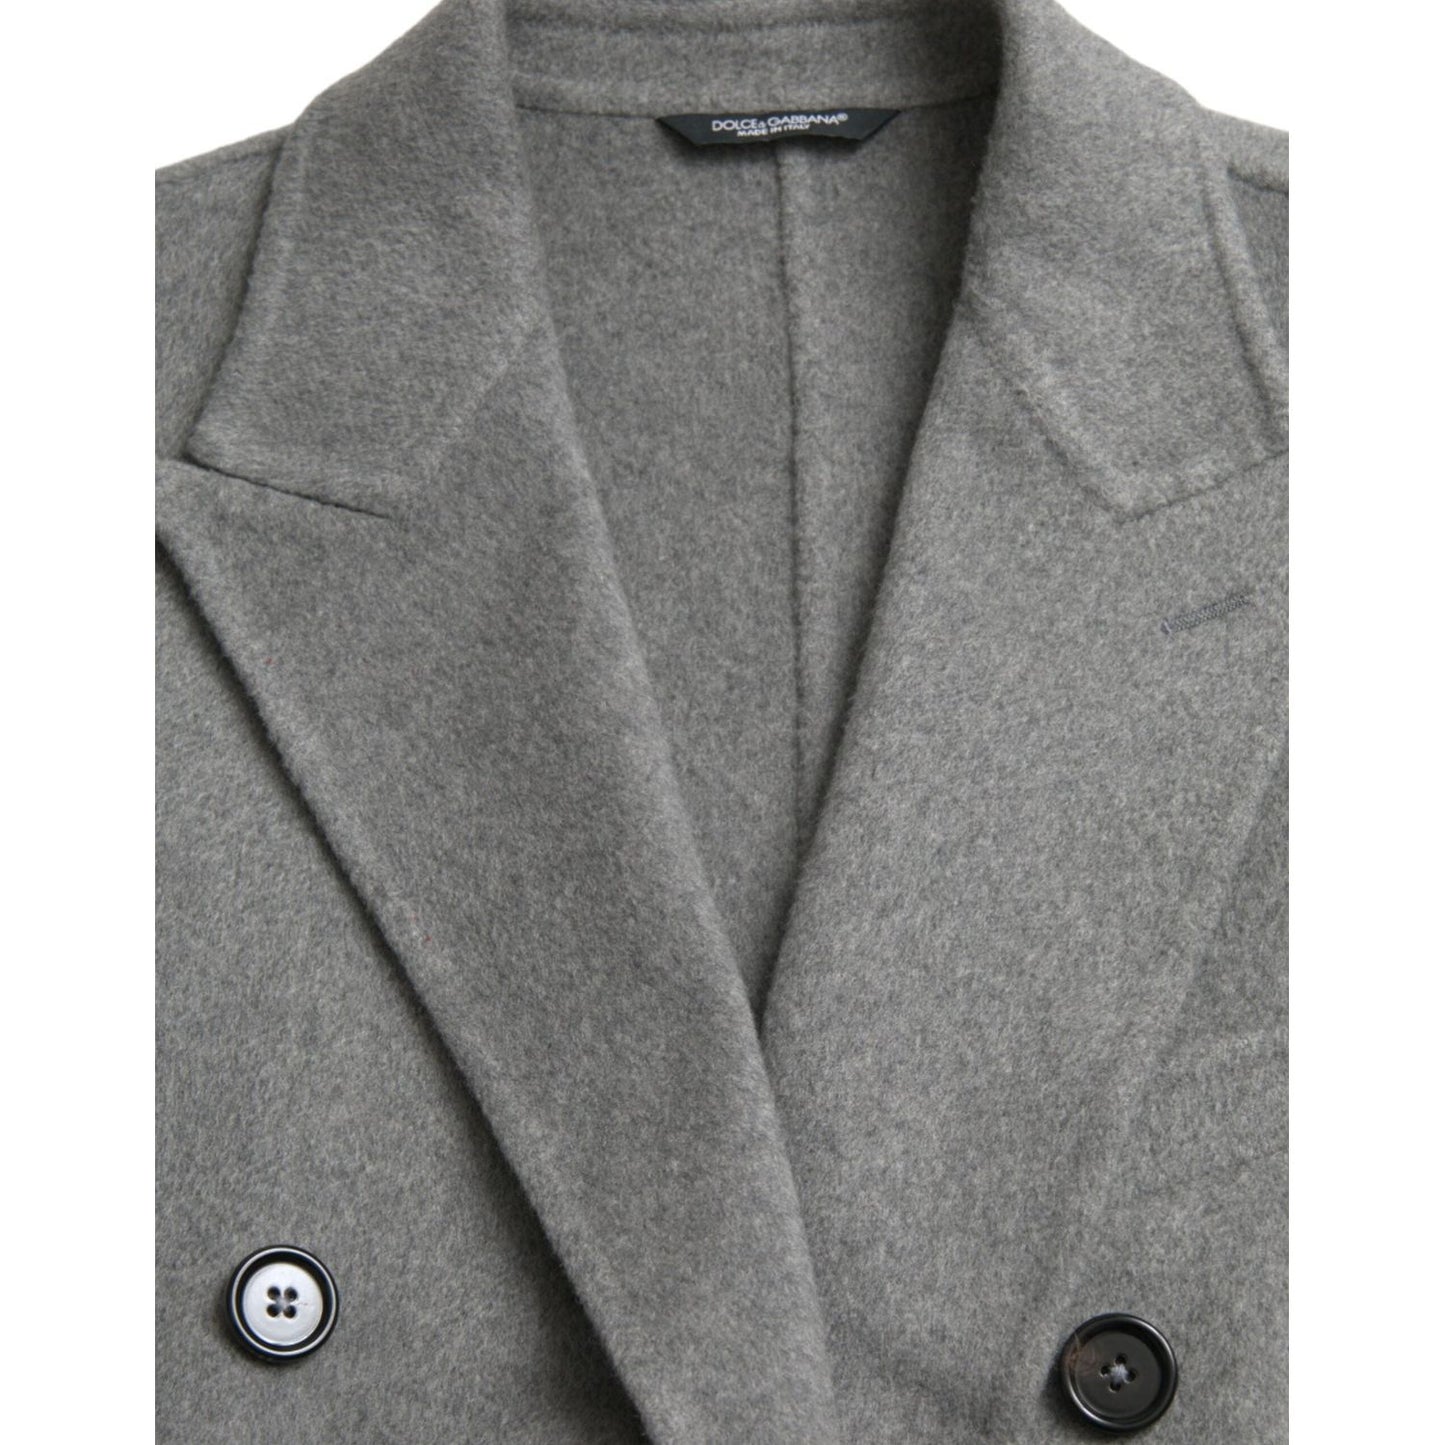 Dolce & Gabbana Gray Double Trench Coat Cashmere Jacket gray-double-trench-coat-cashmere-jacket